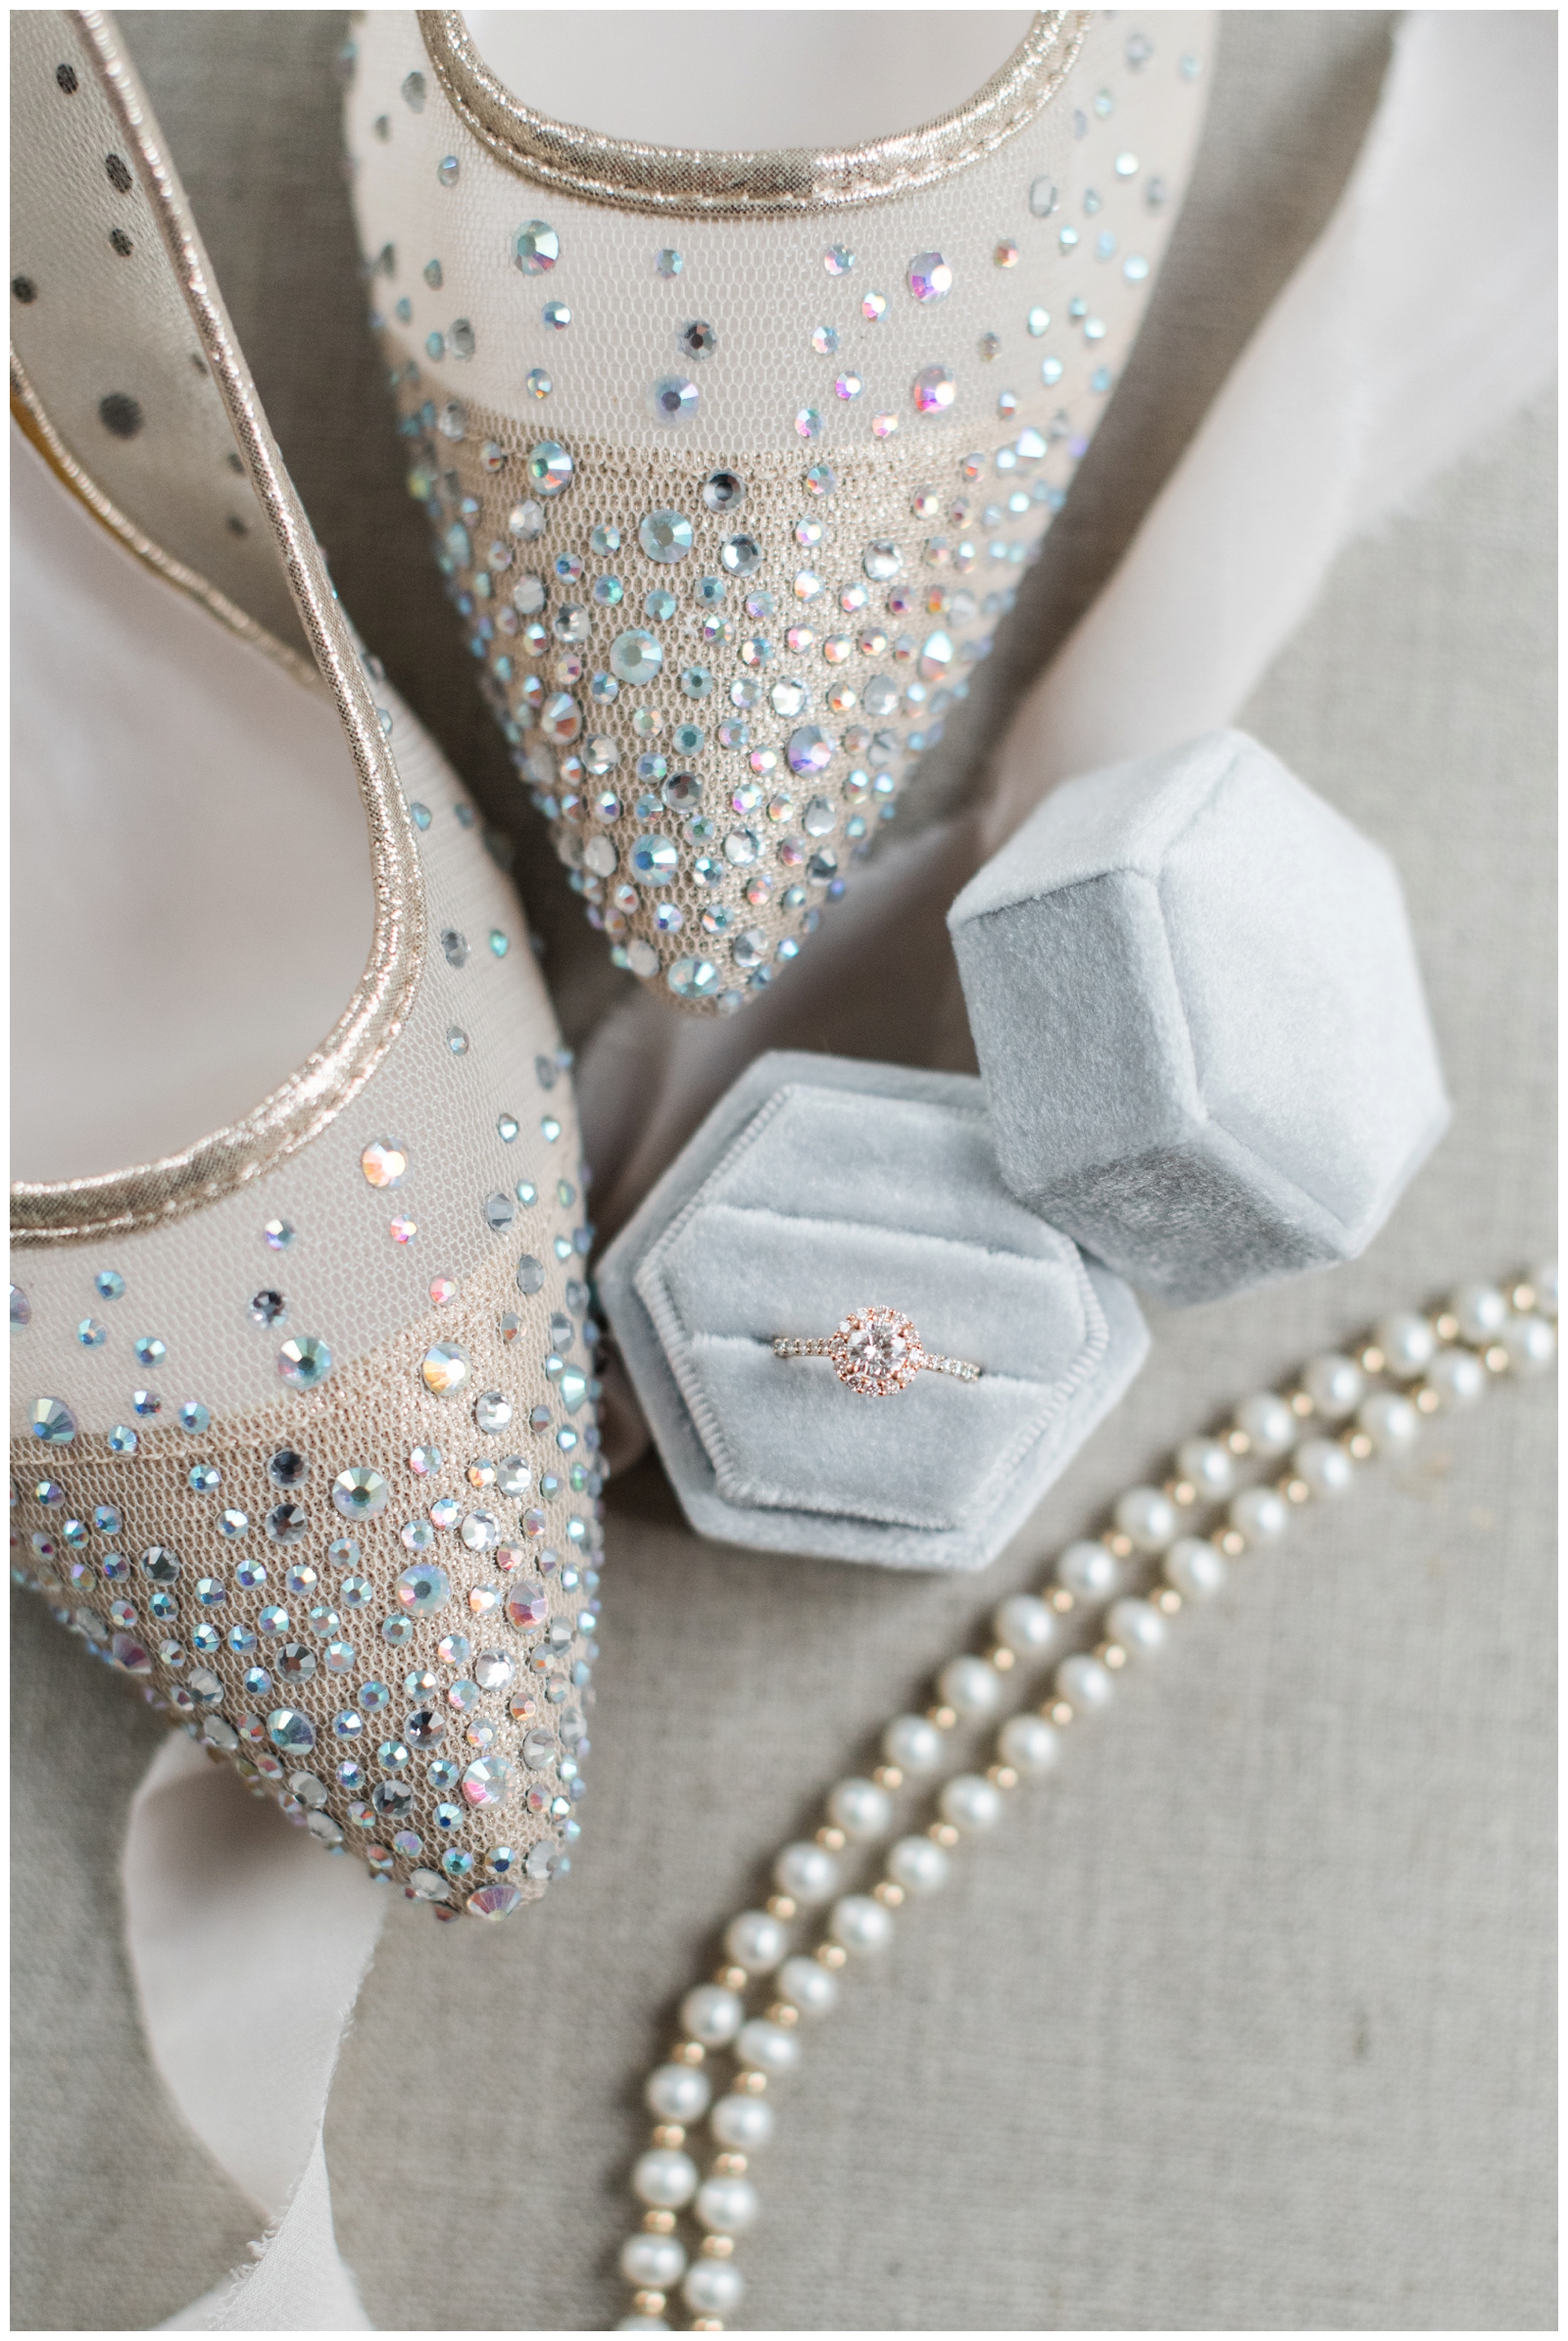 bride's shoes with jewel details and wedding ring in pastel blue box